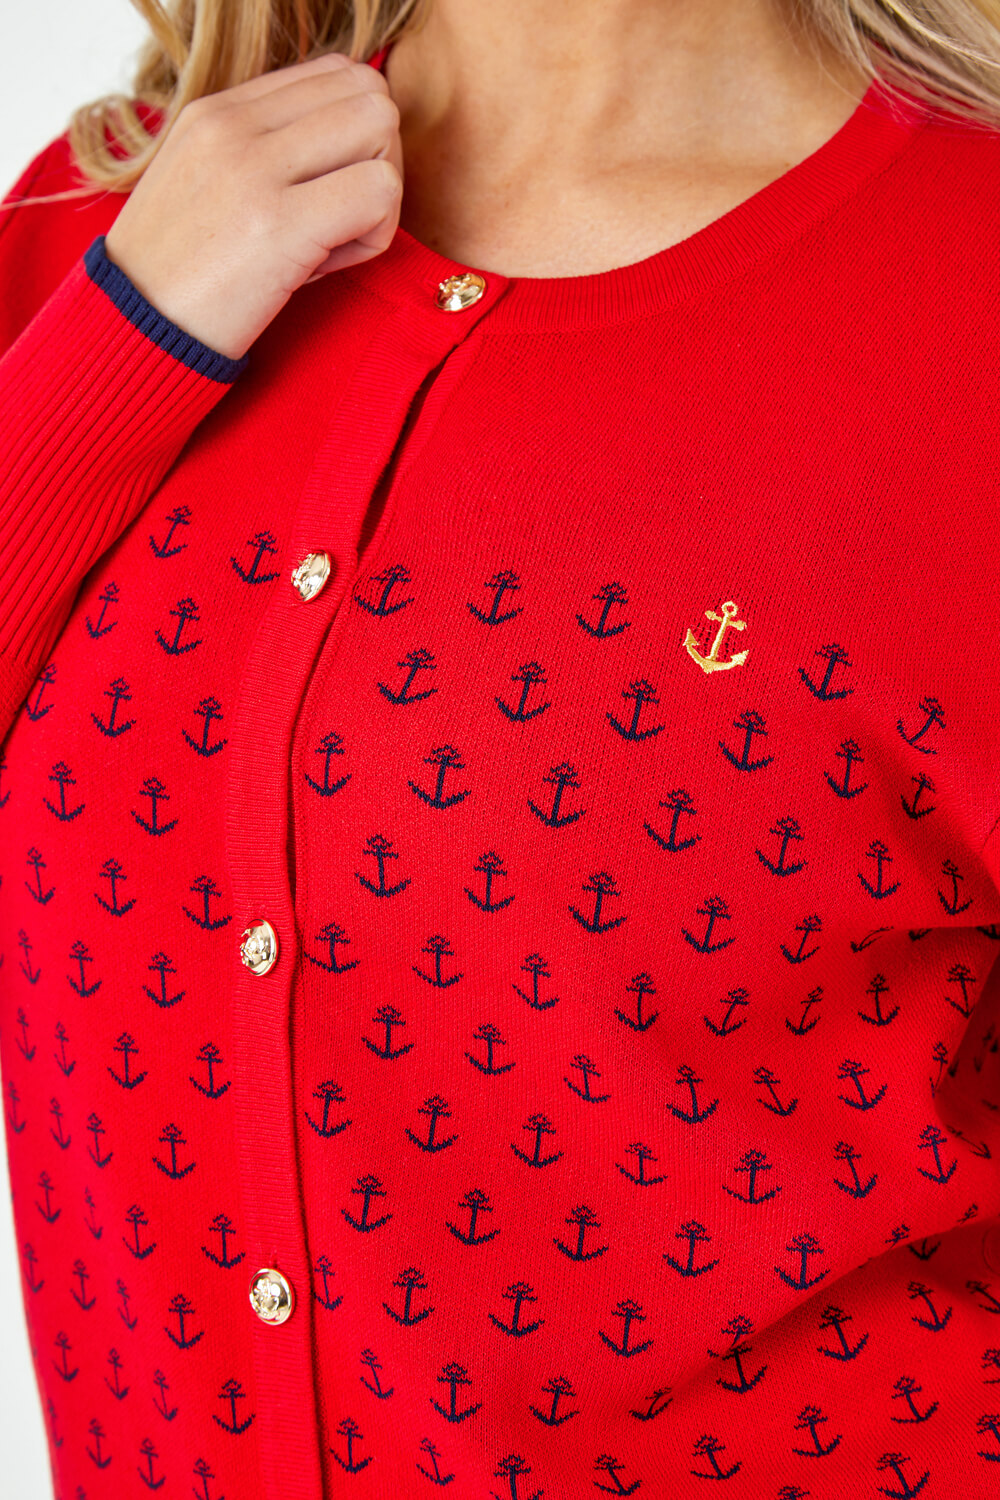 Red Petite Anchor Embroidered Cardigan, Image 5 of 5